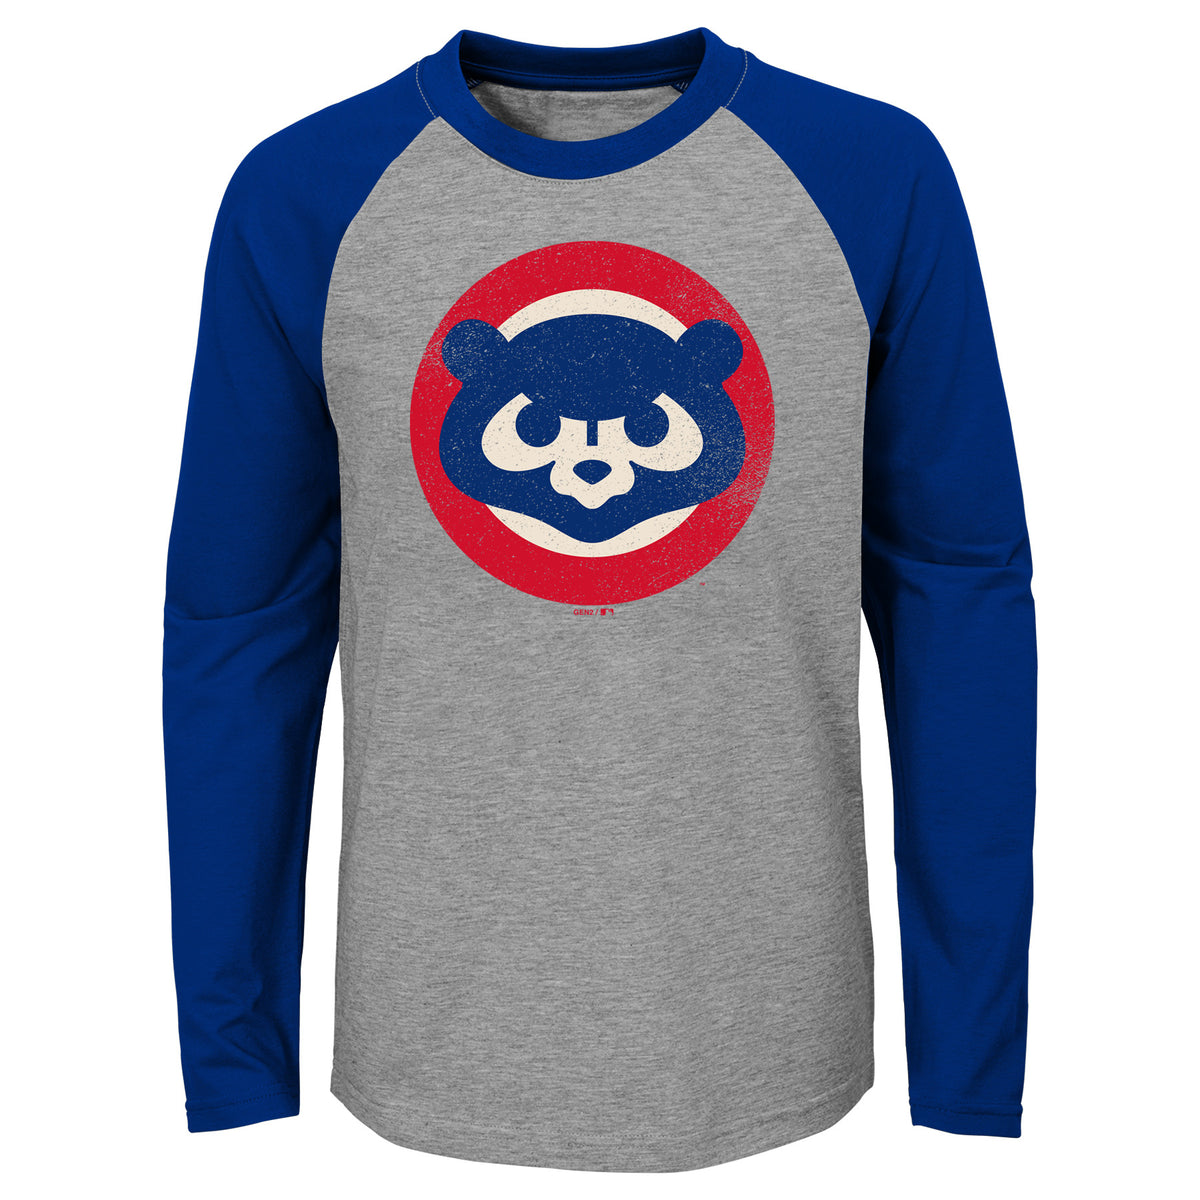 Outerstuff Chicago Cubs Youth Playmaker T-Shirt Large = 14-16